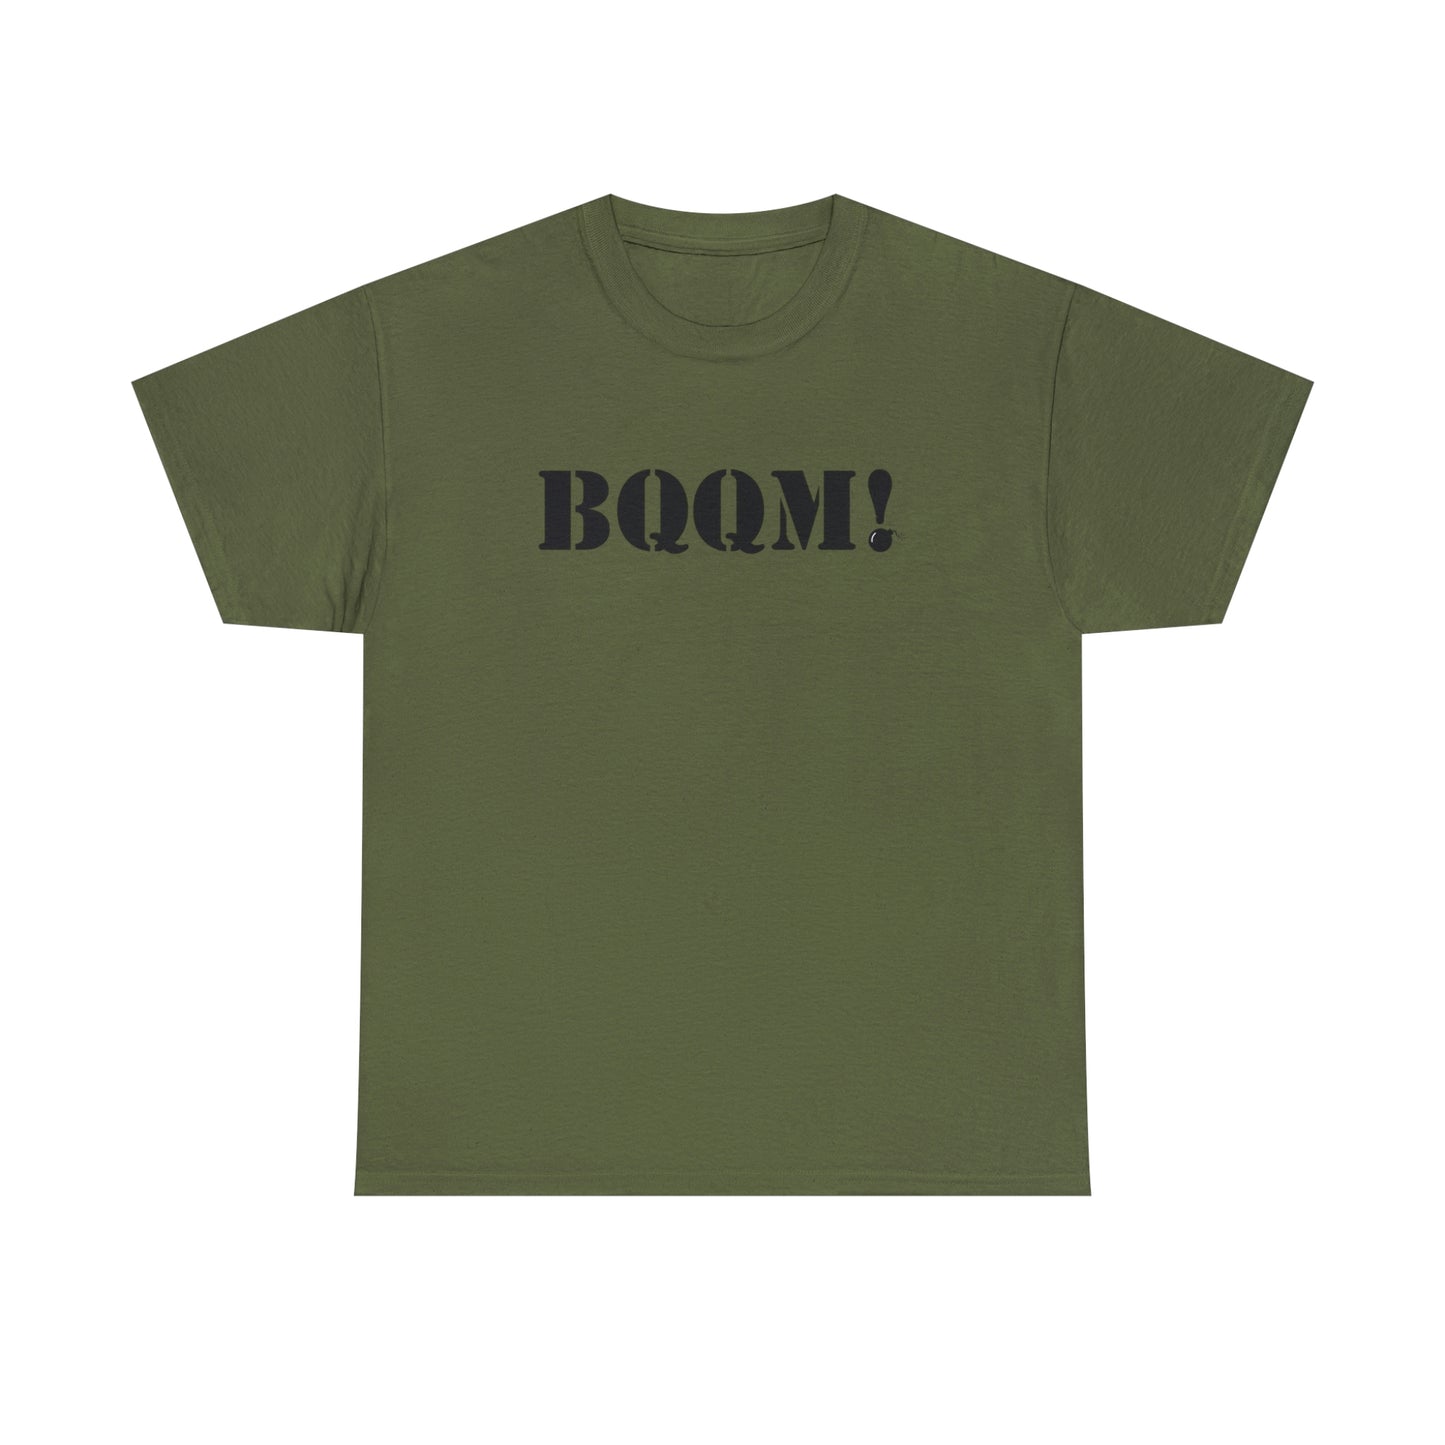 Patriotic Conspiracy T-Shirt BOOM TShirt For ConservativeT  Shirt With Q Shirt For Political T-Shirt With Bomb Shirt For Conservative Gift